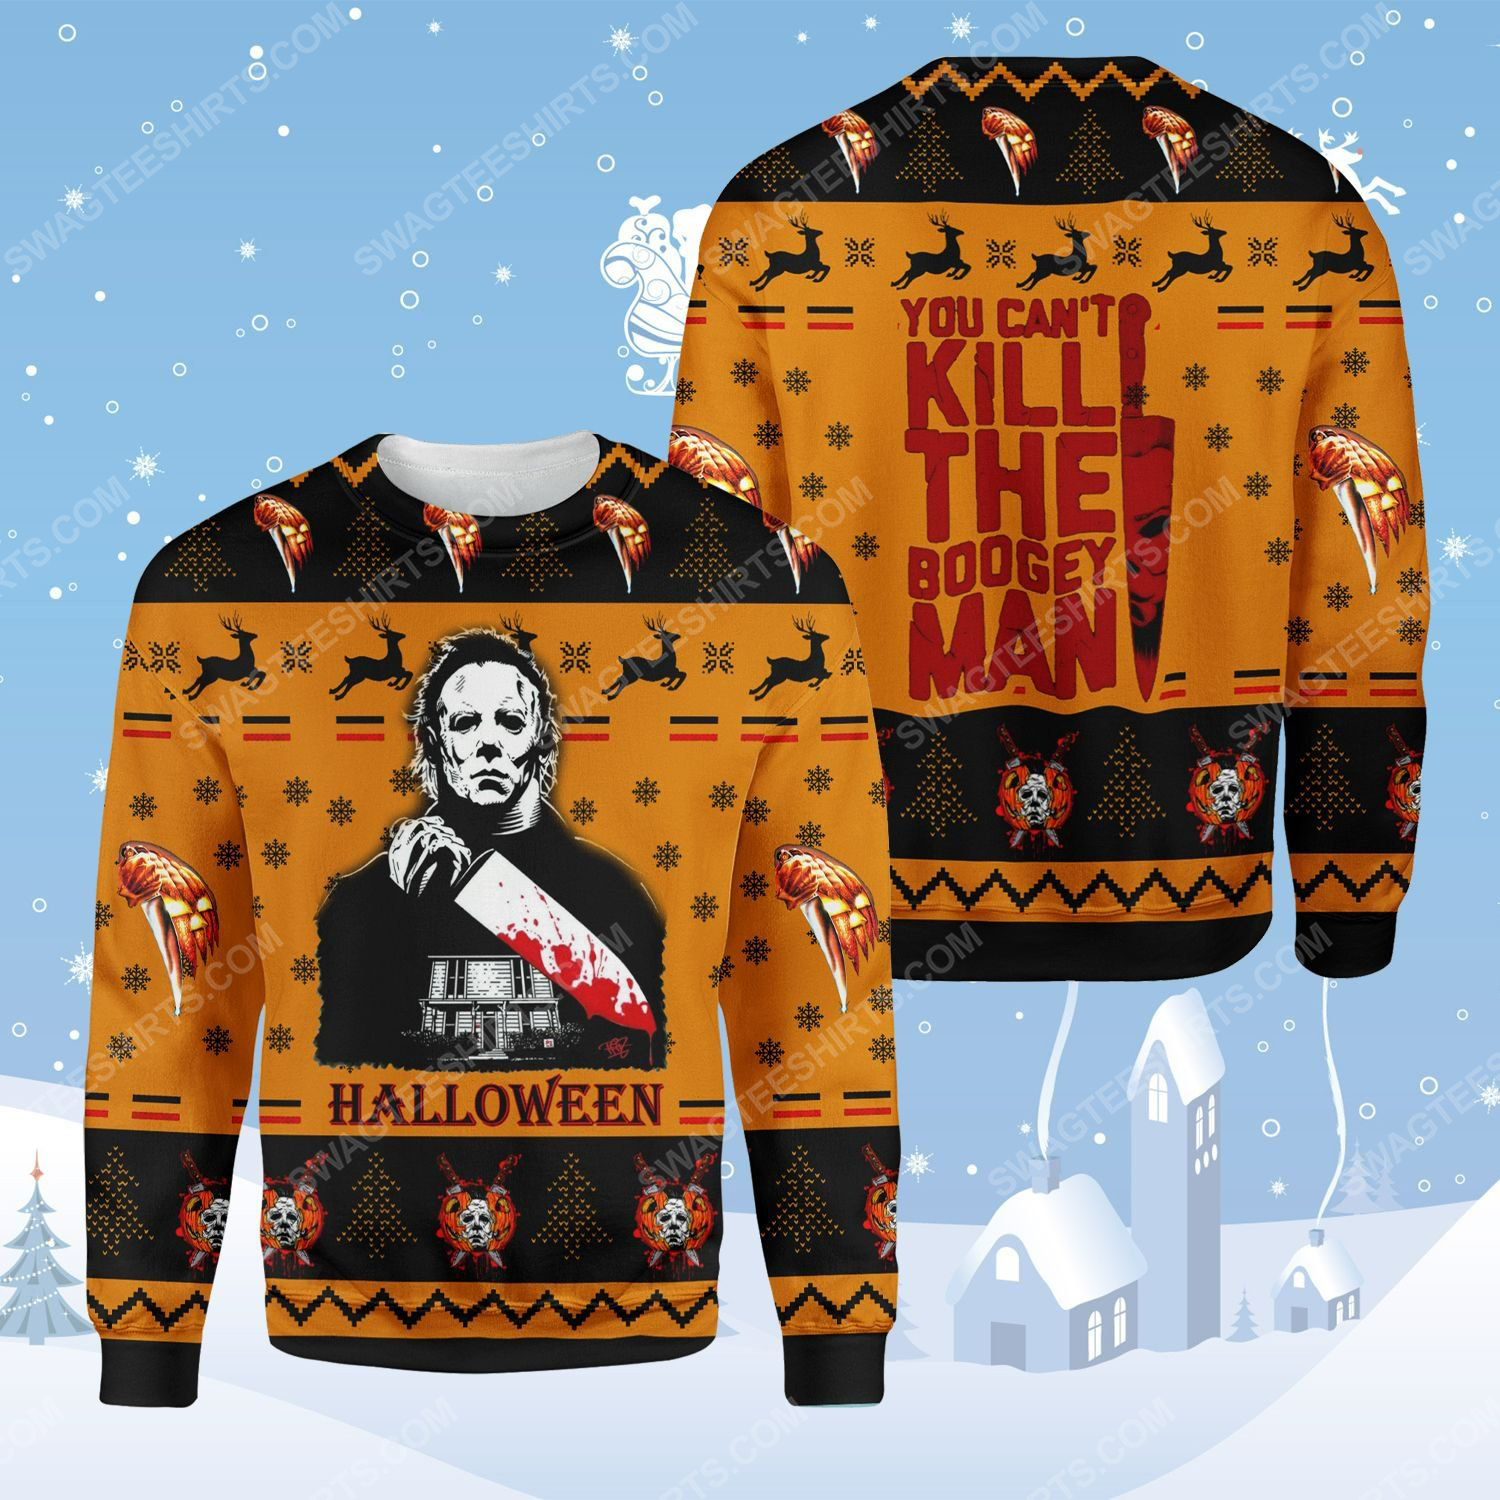 Halloween michael myers you can't kill the bogeyman ​ugly christmas sweater - Copy (3)